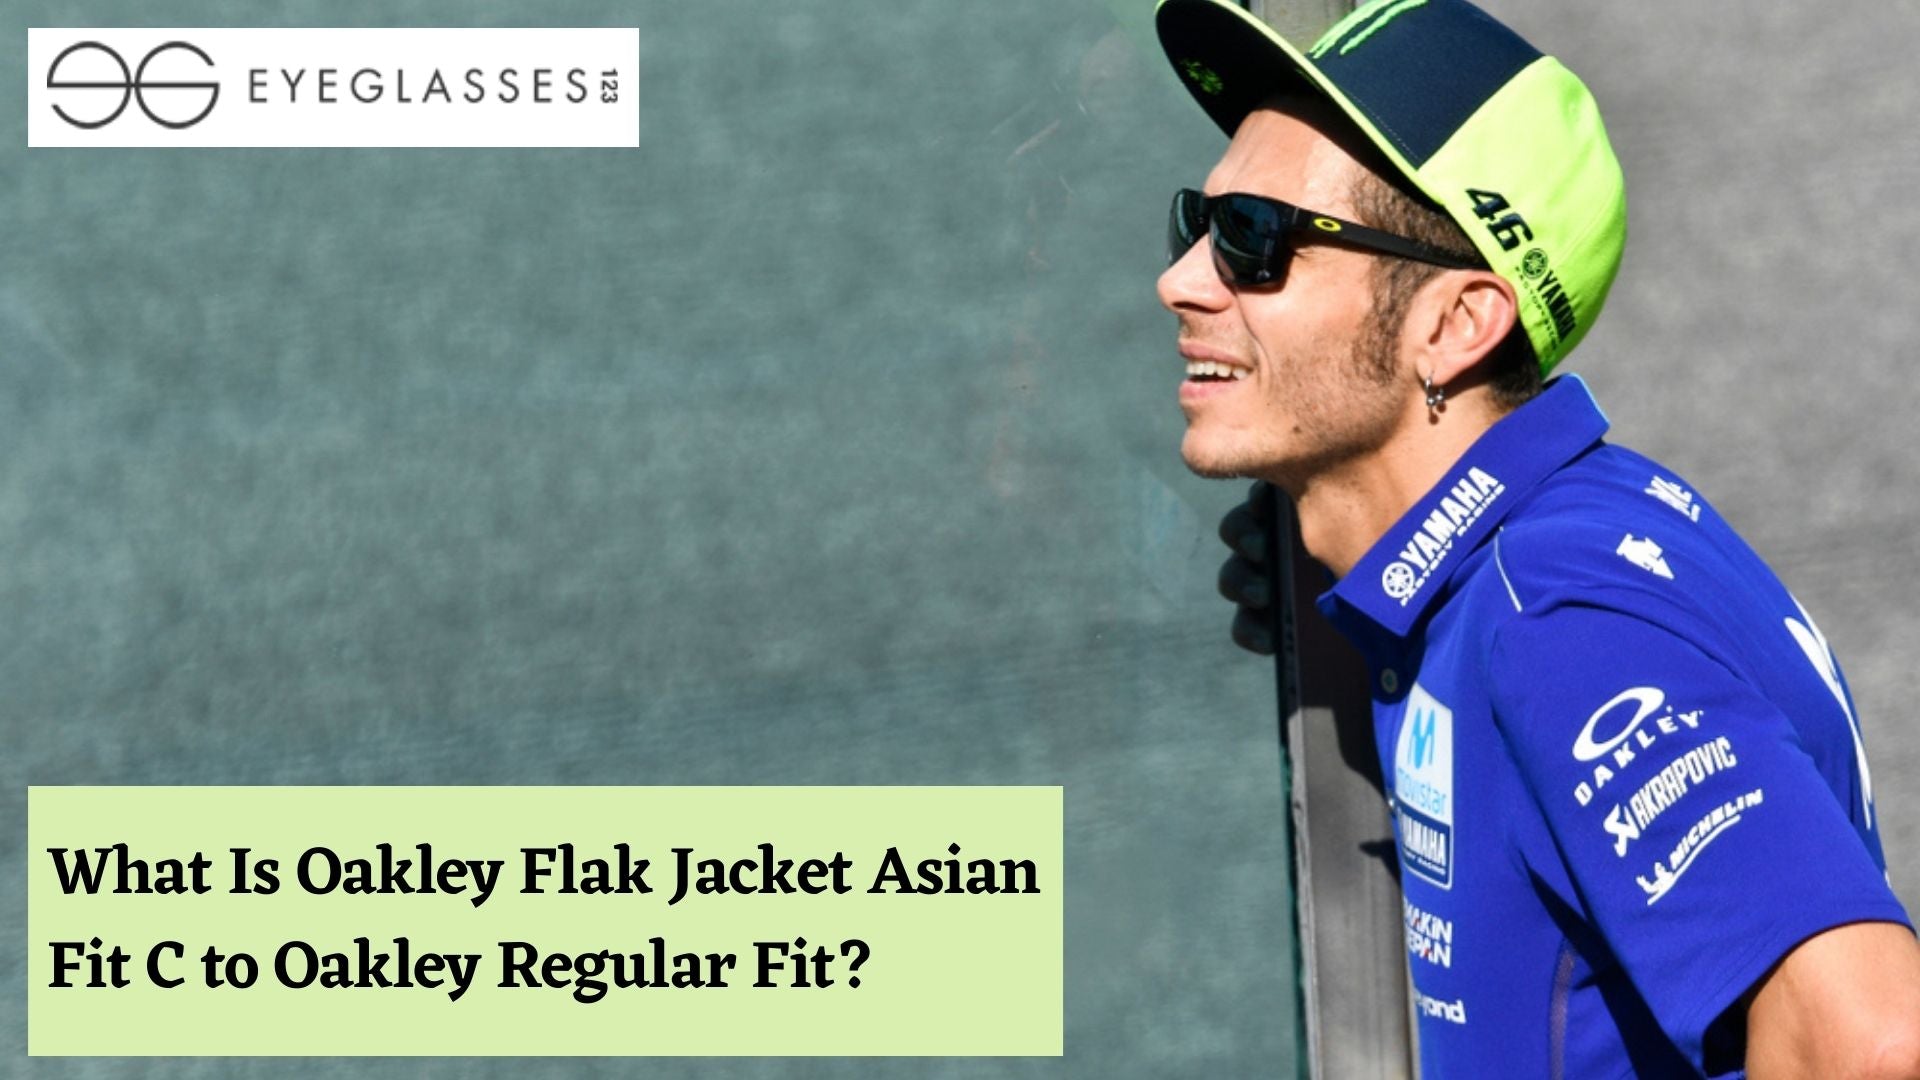 WHAT IS OAKLEY FLAK JACKET ASIAN FIT COMPARED TO OAKLEY REGULAR FIT